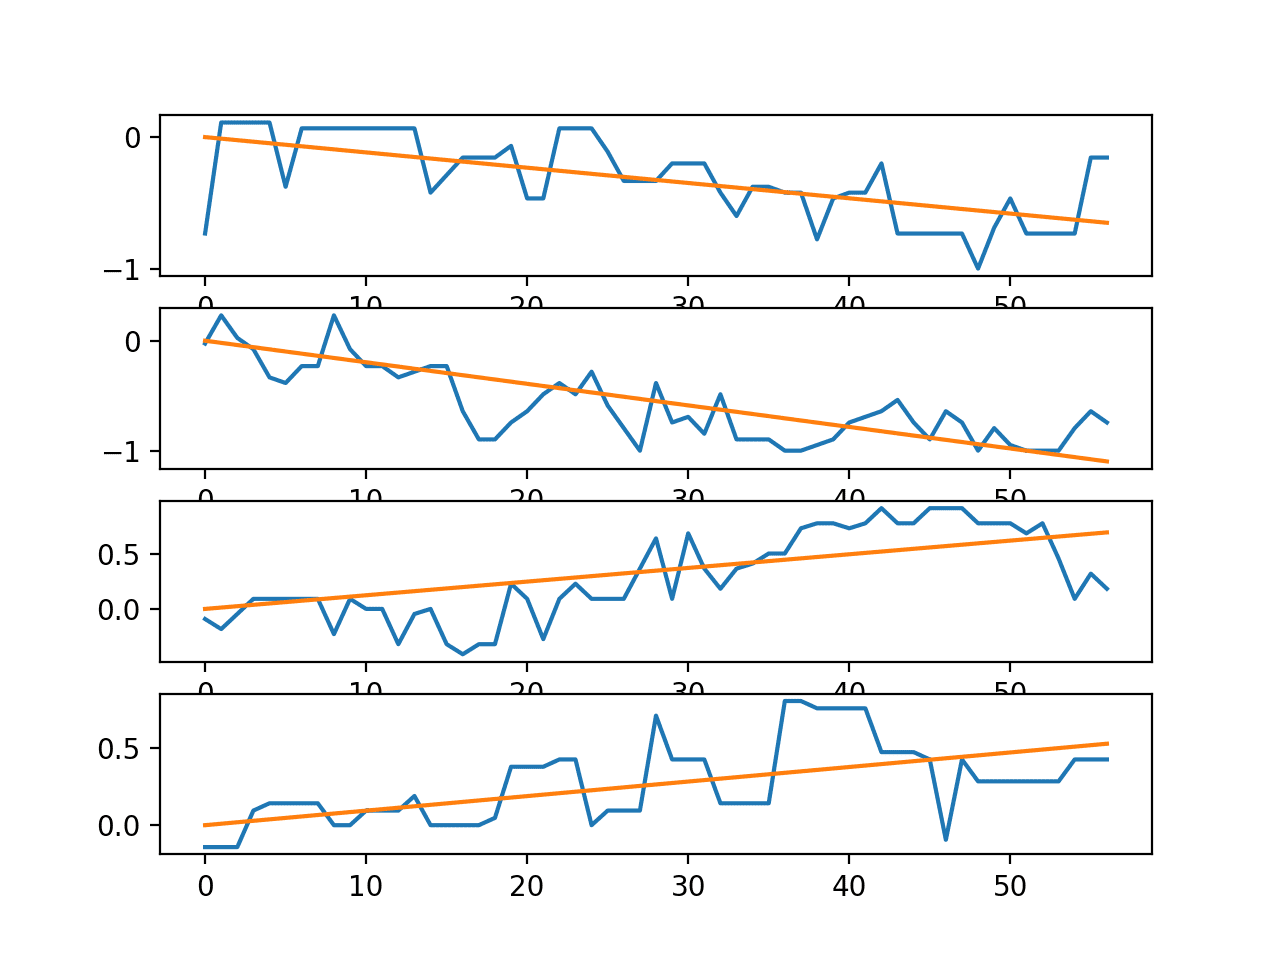 Line plots for the time series in a single trace with trend lines